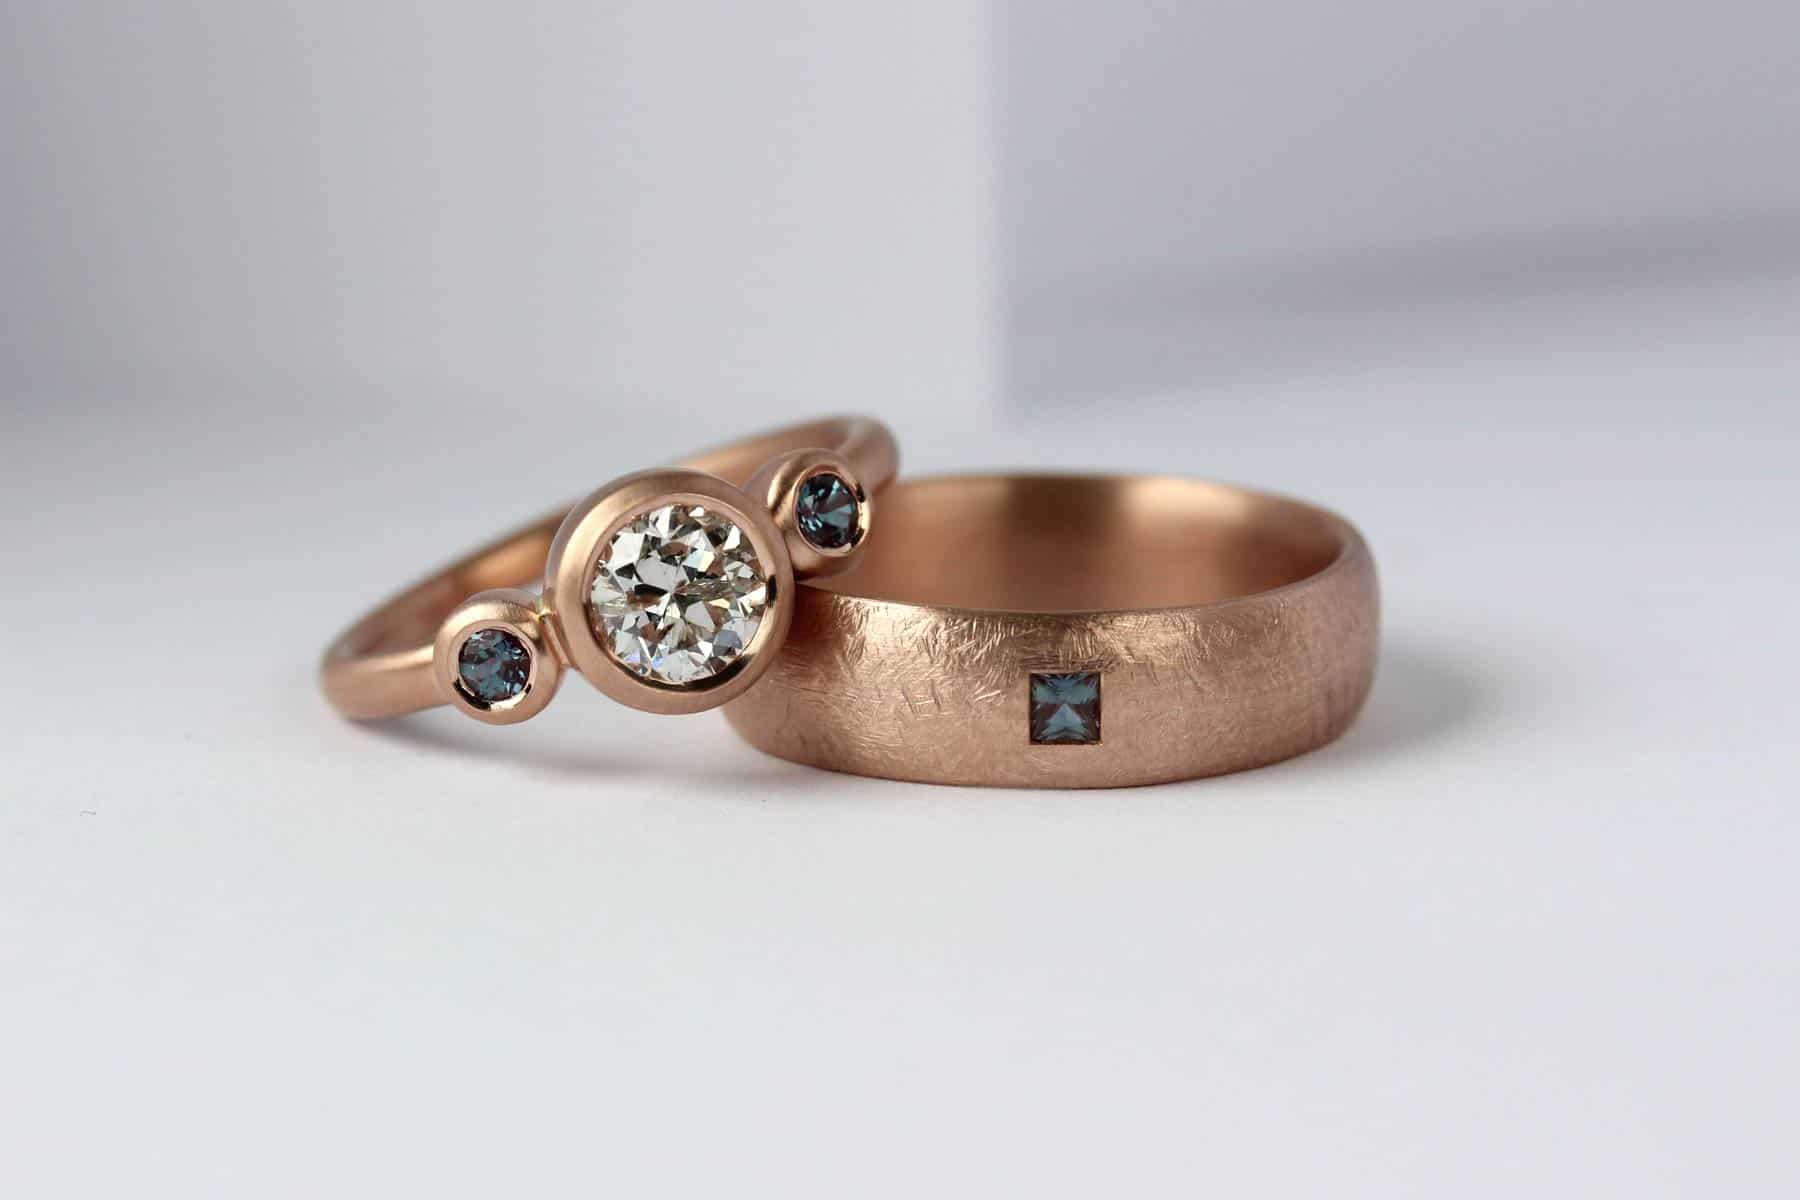 ethical jewellery design conflict free diamonds recycled precious metals